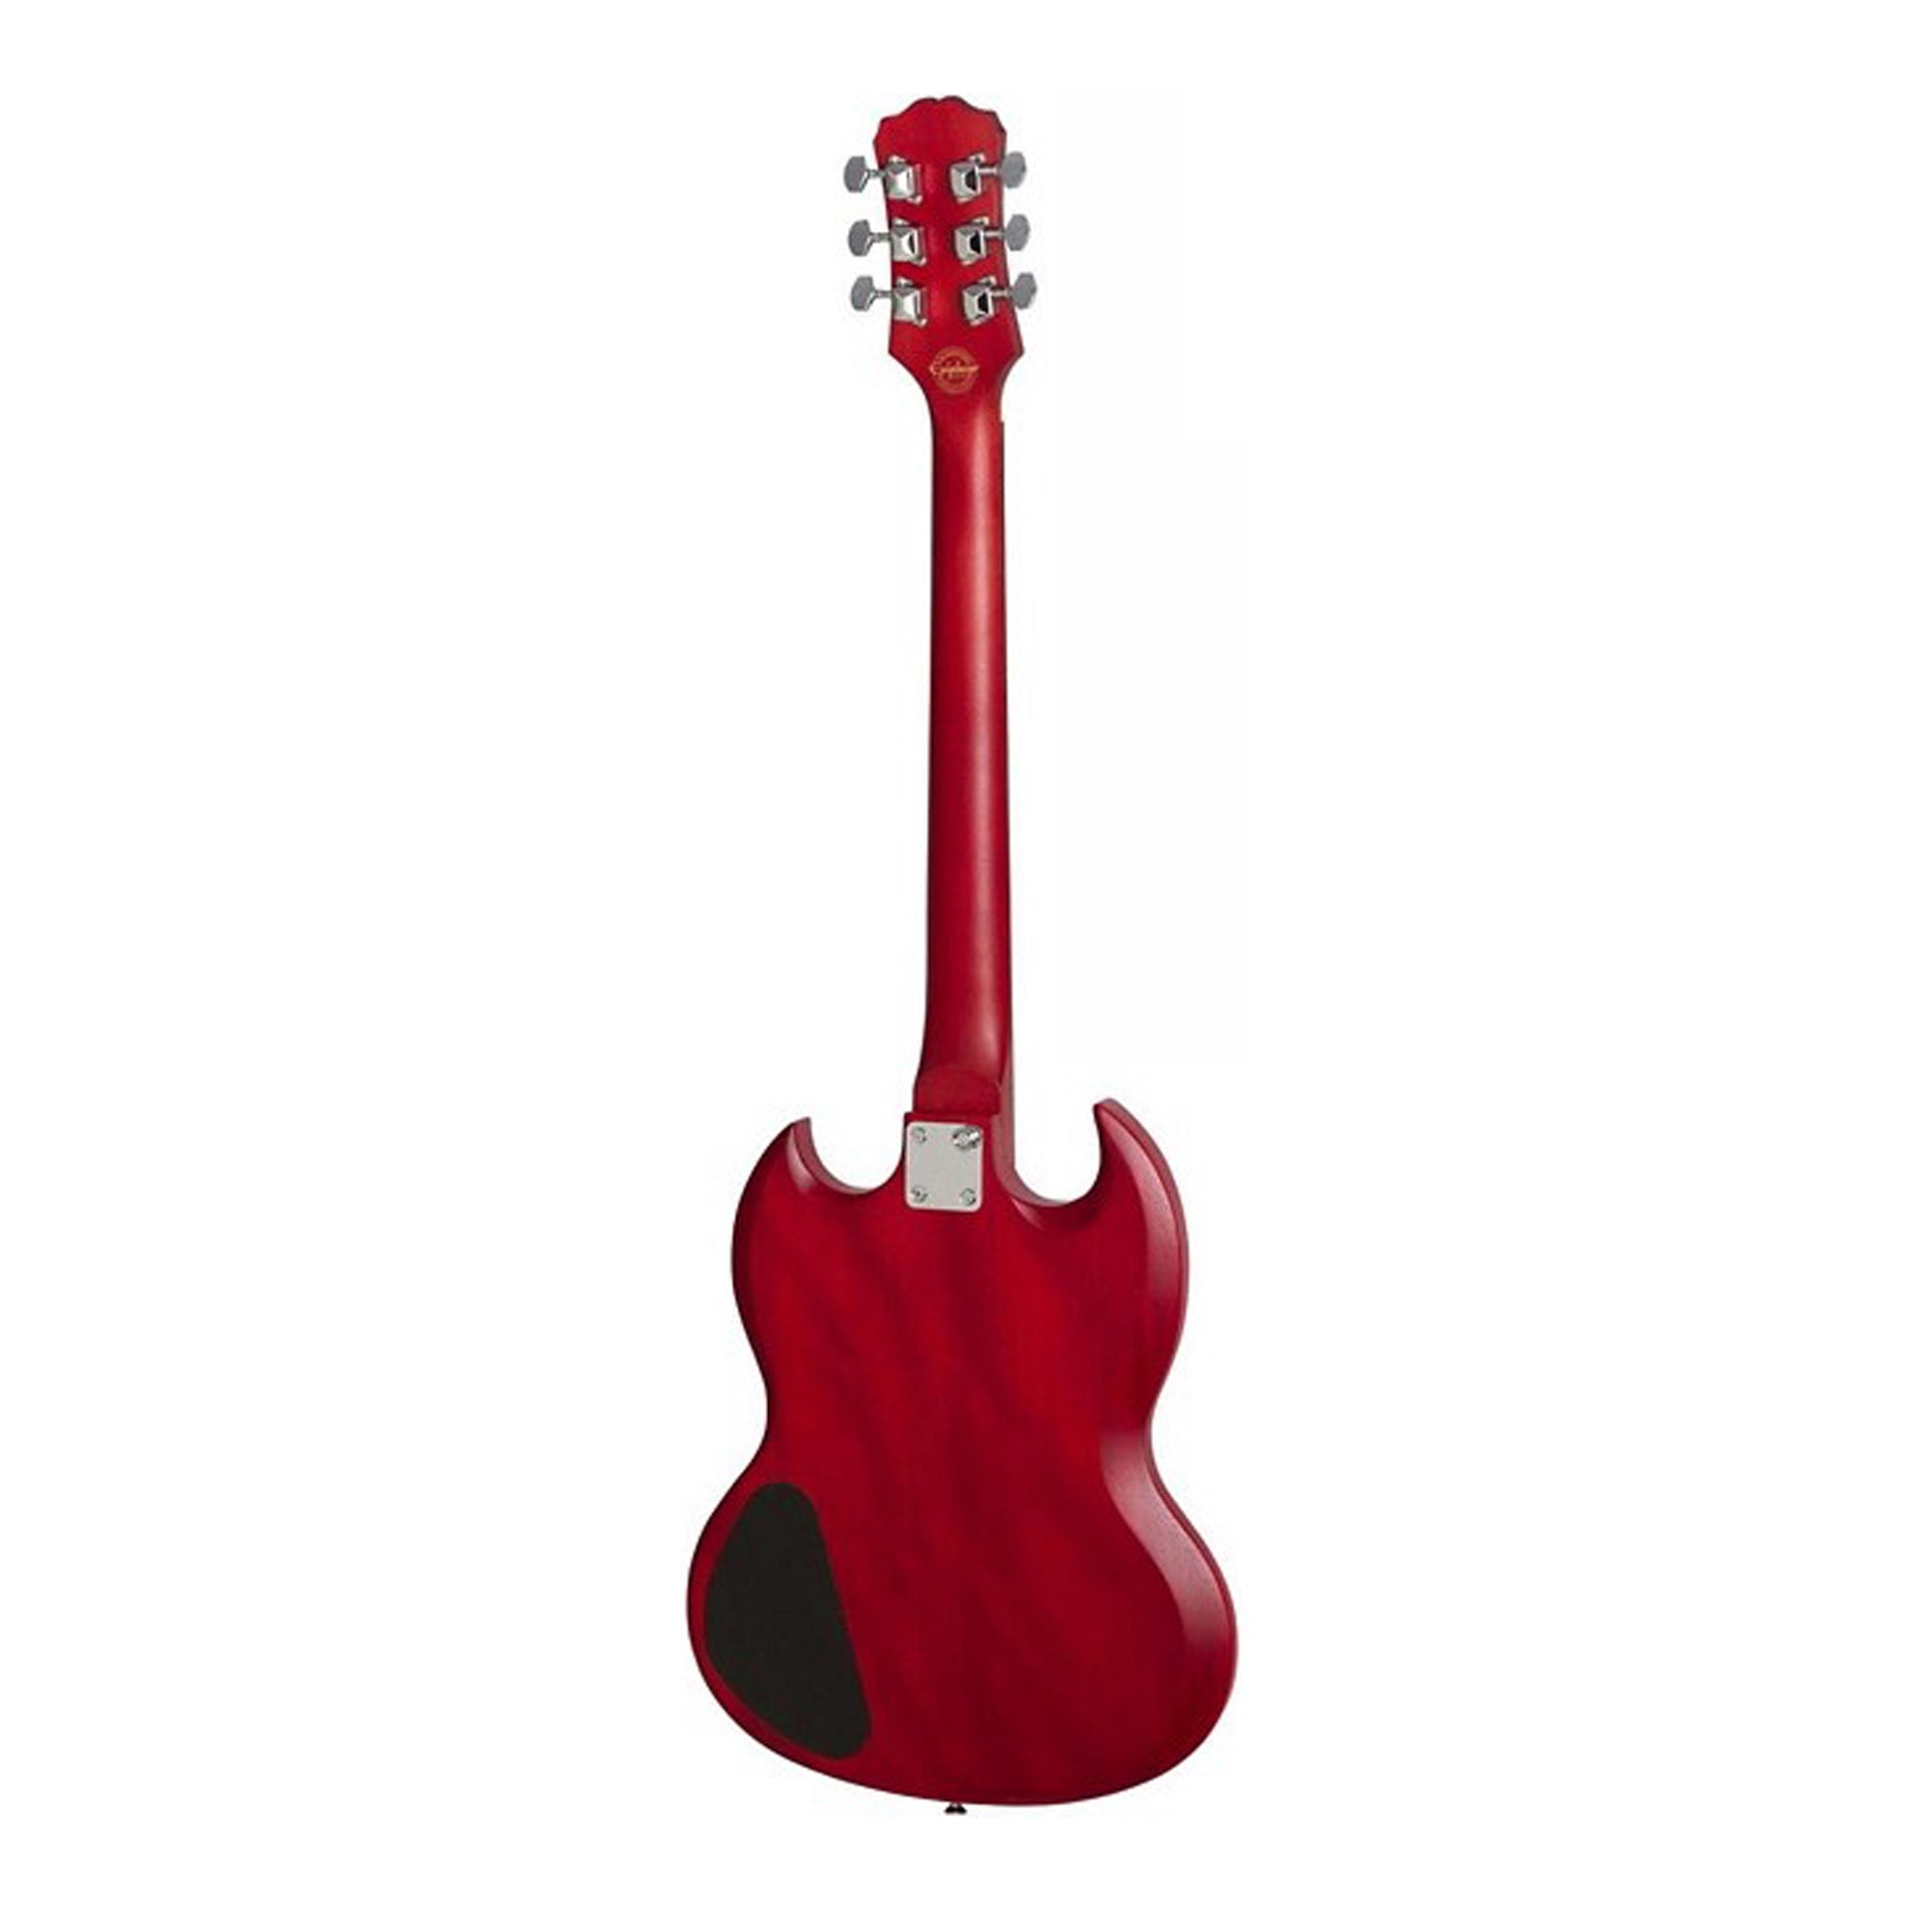 Epiphone EGSVCHVCH1 SG Special VE Cherry Electric Guitar